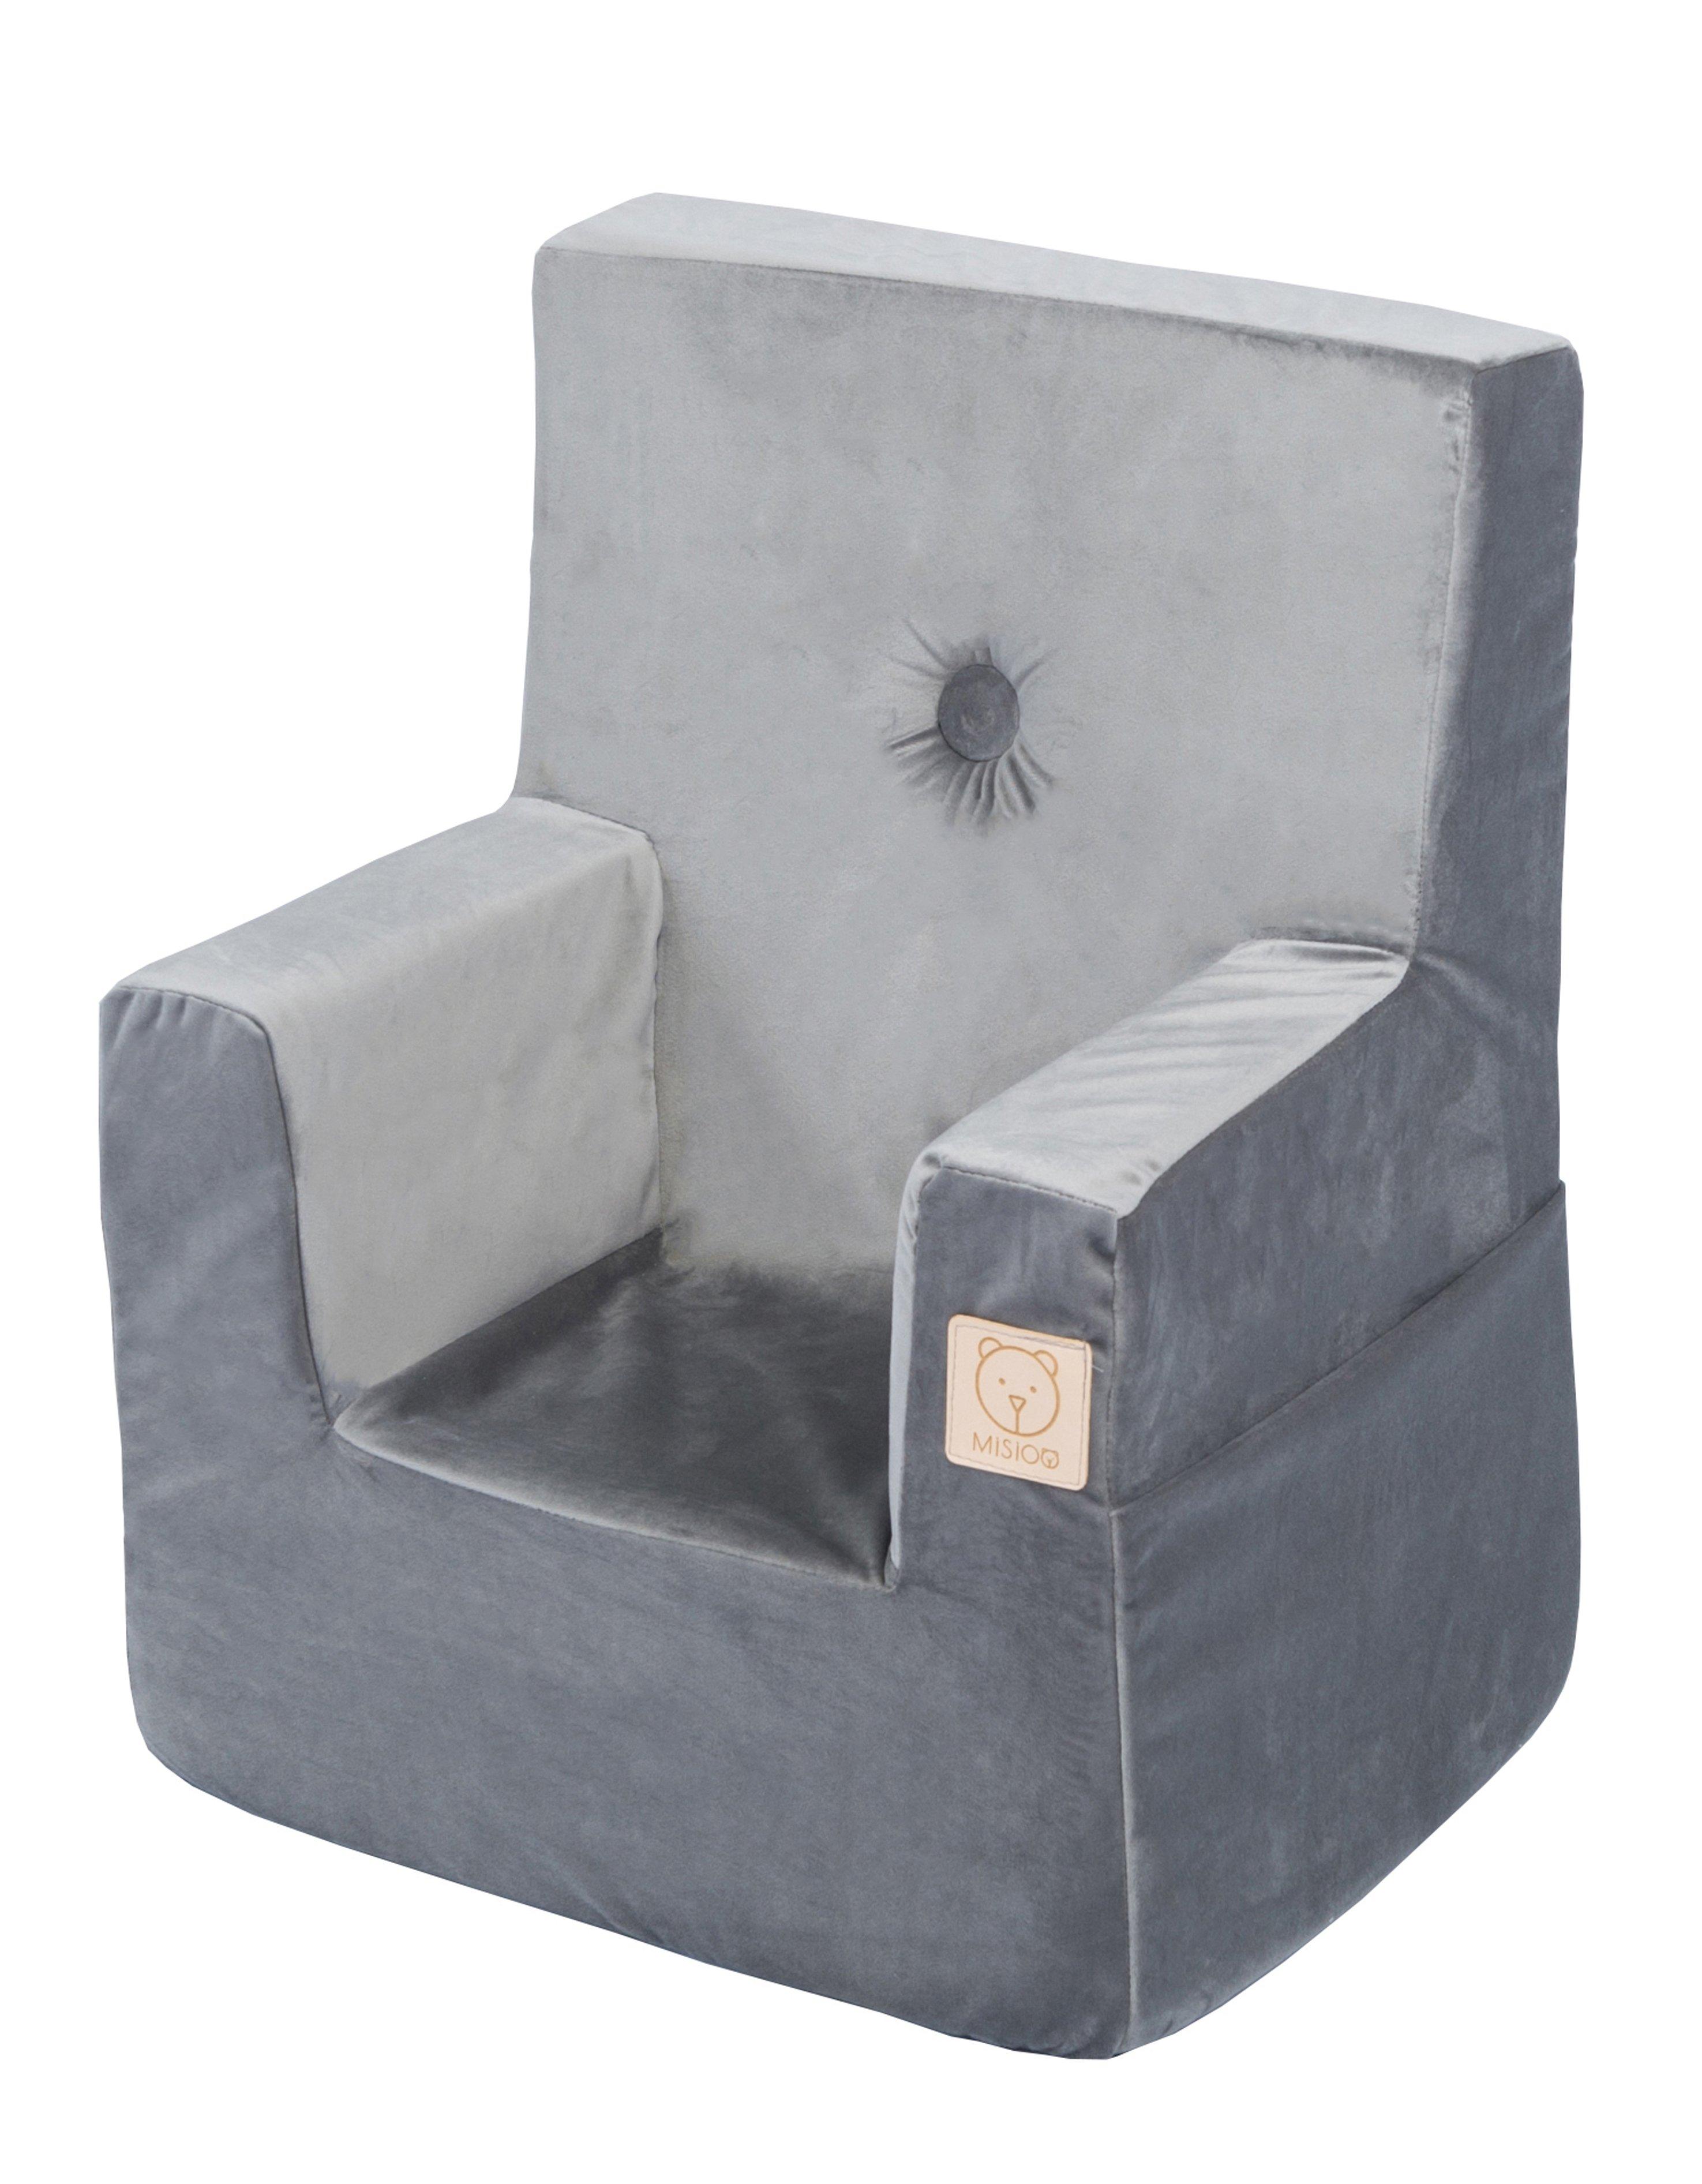 Misioo - Foldie Seat with Side Pocket Grey